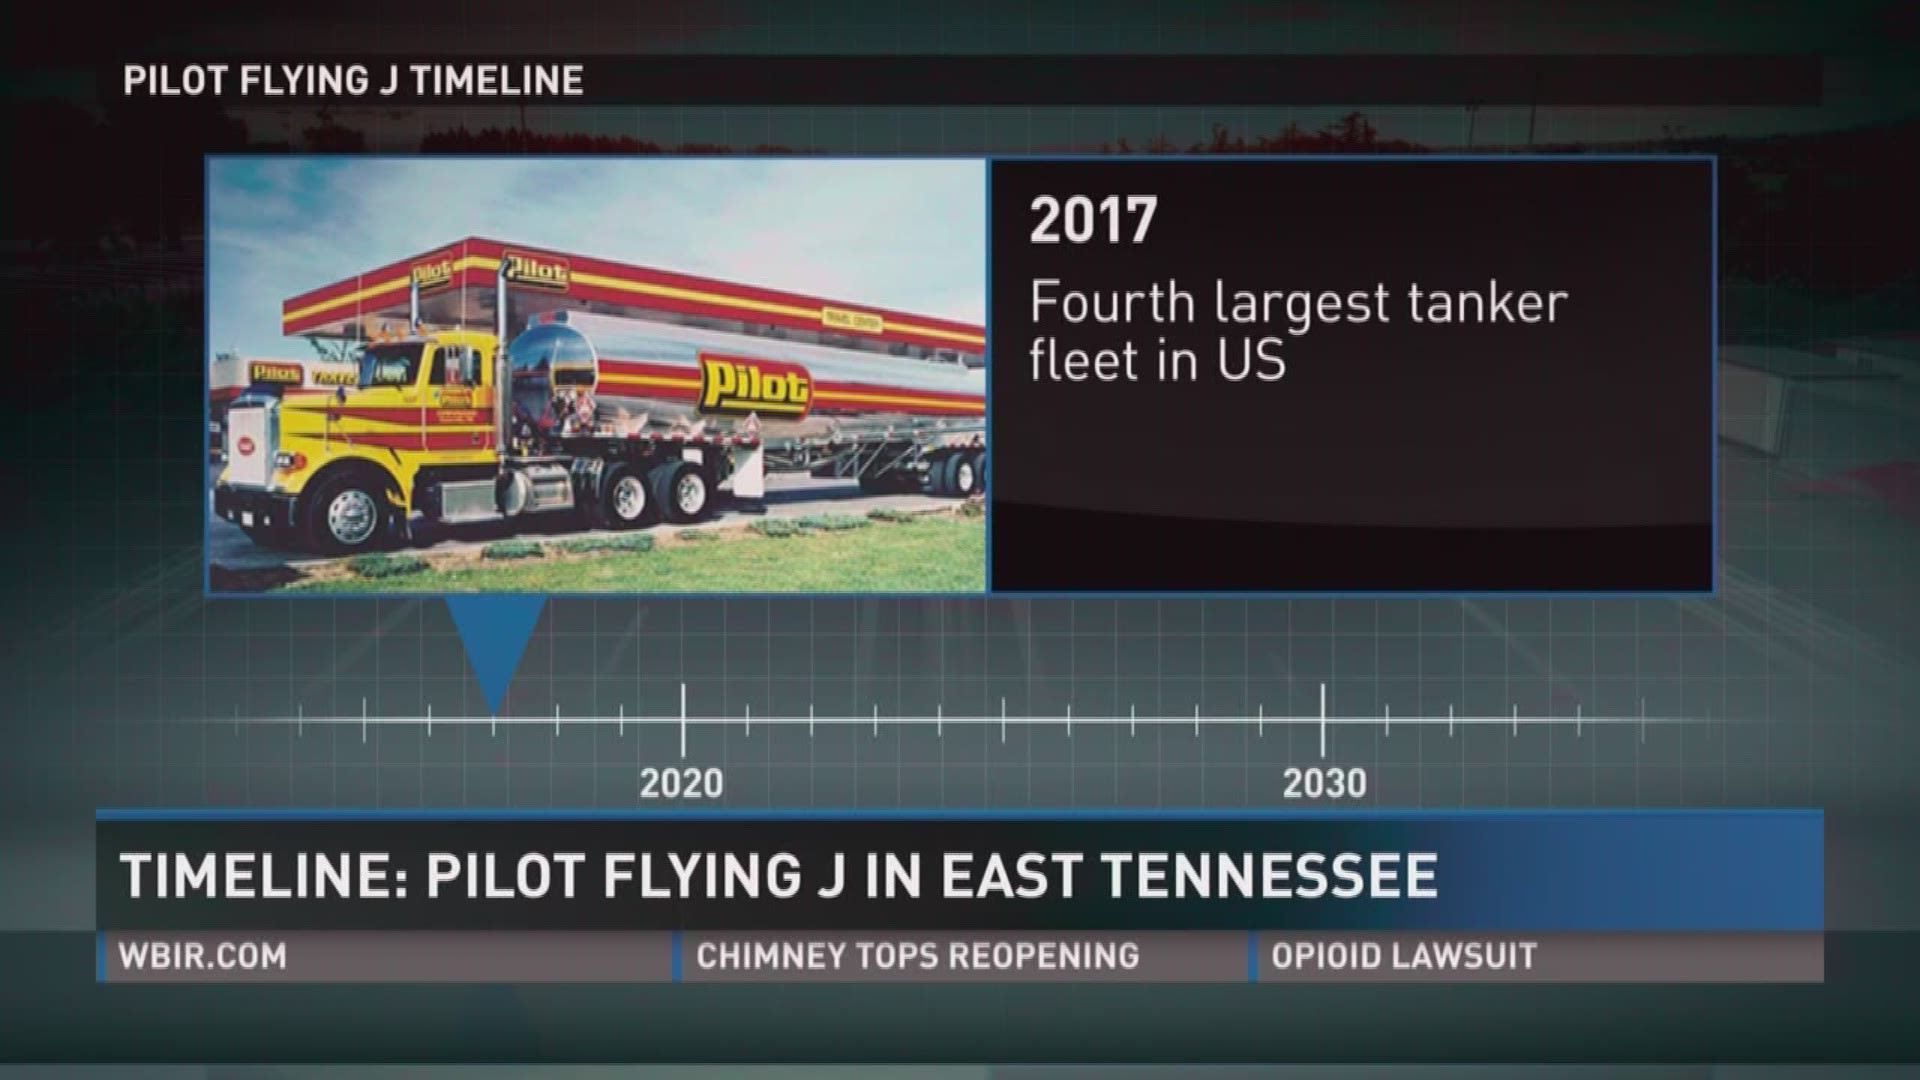 Here is a look back at some of the biggest moments for East Tennessee-based Pilot Flying J.